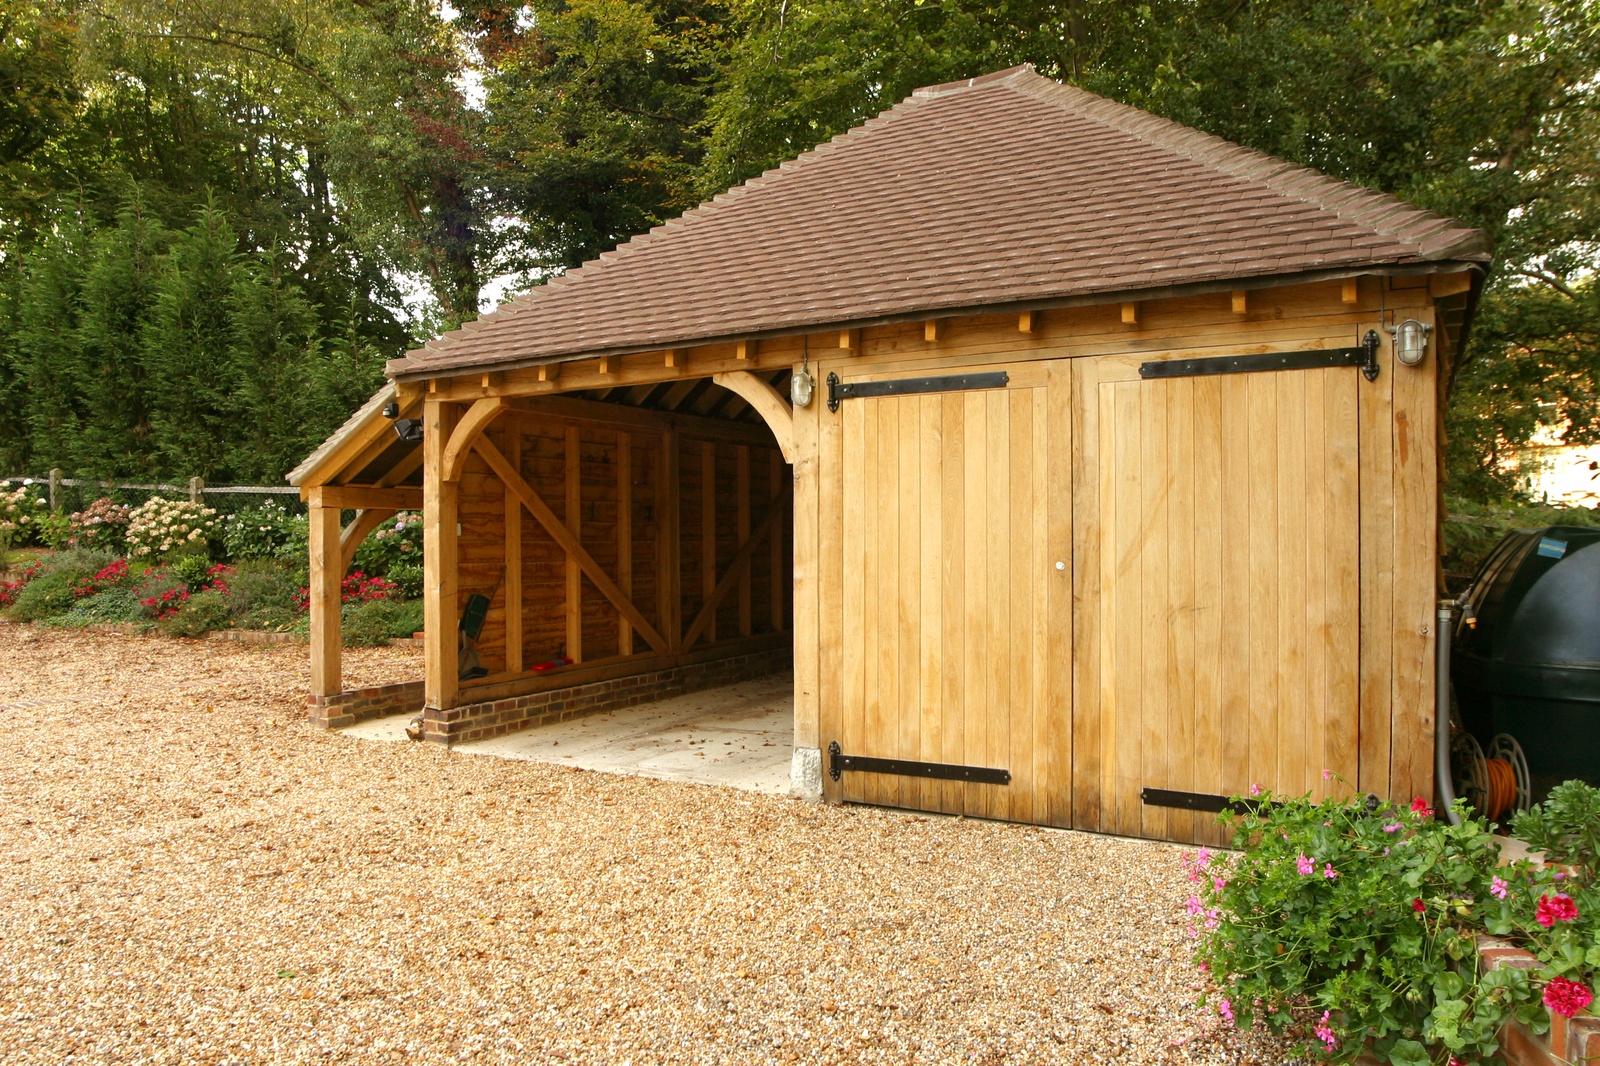 Using the latest technology to bring oak garage designs to life